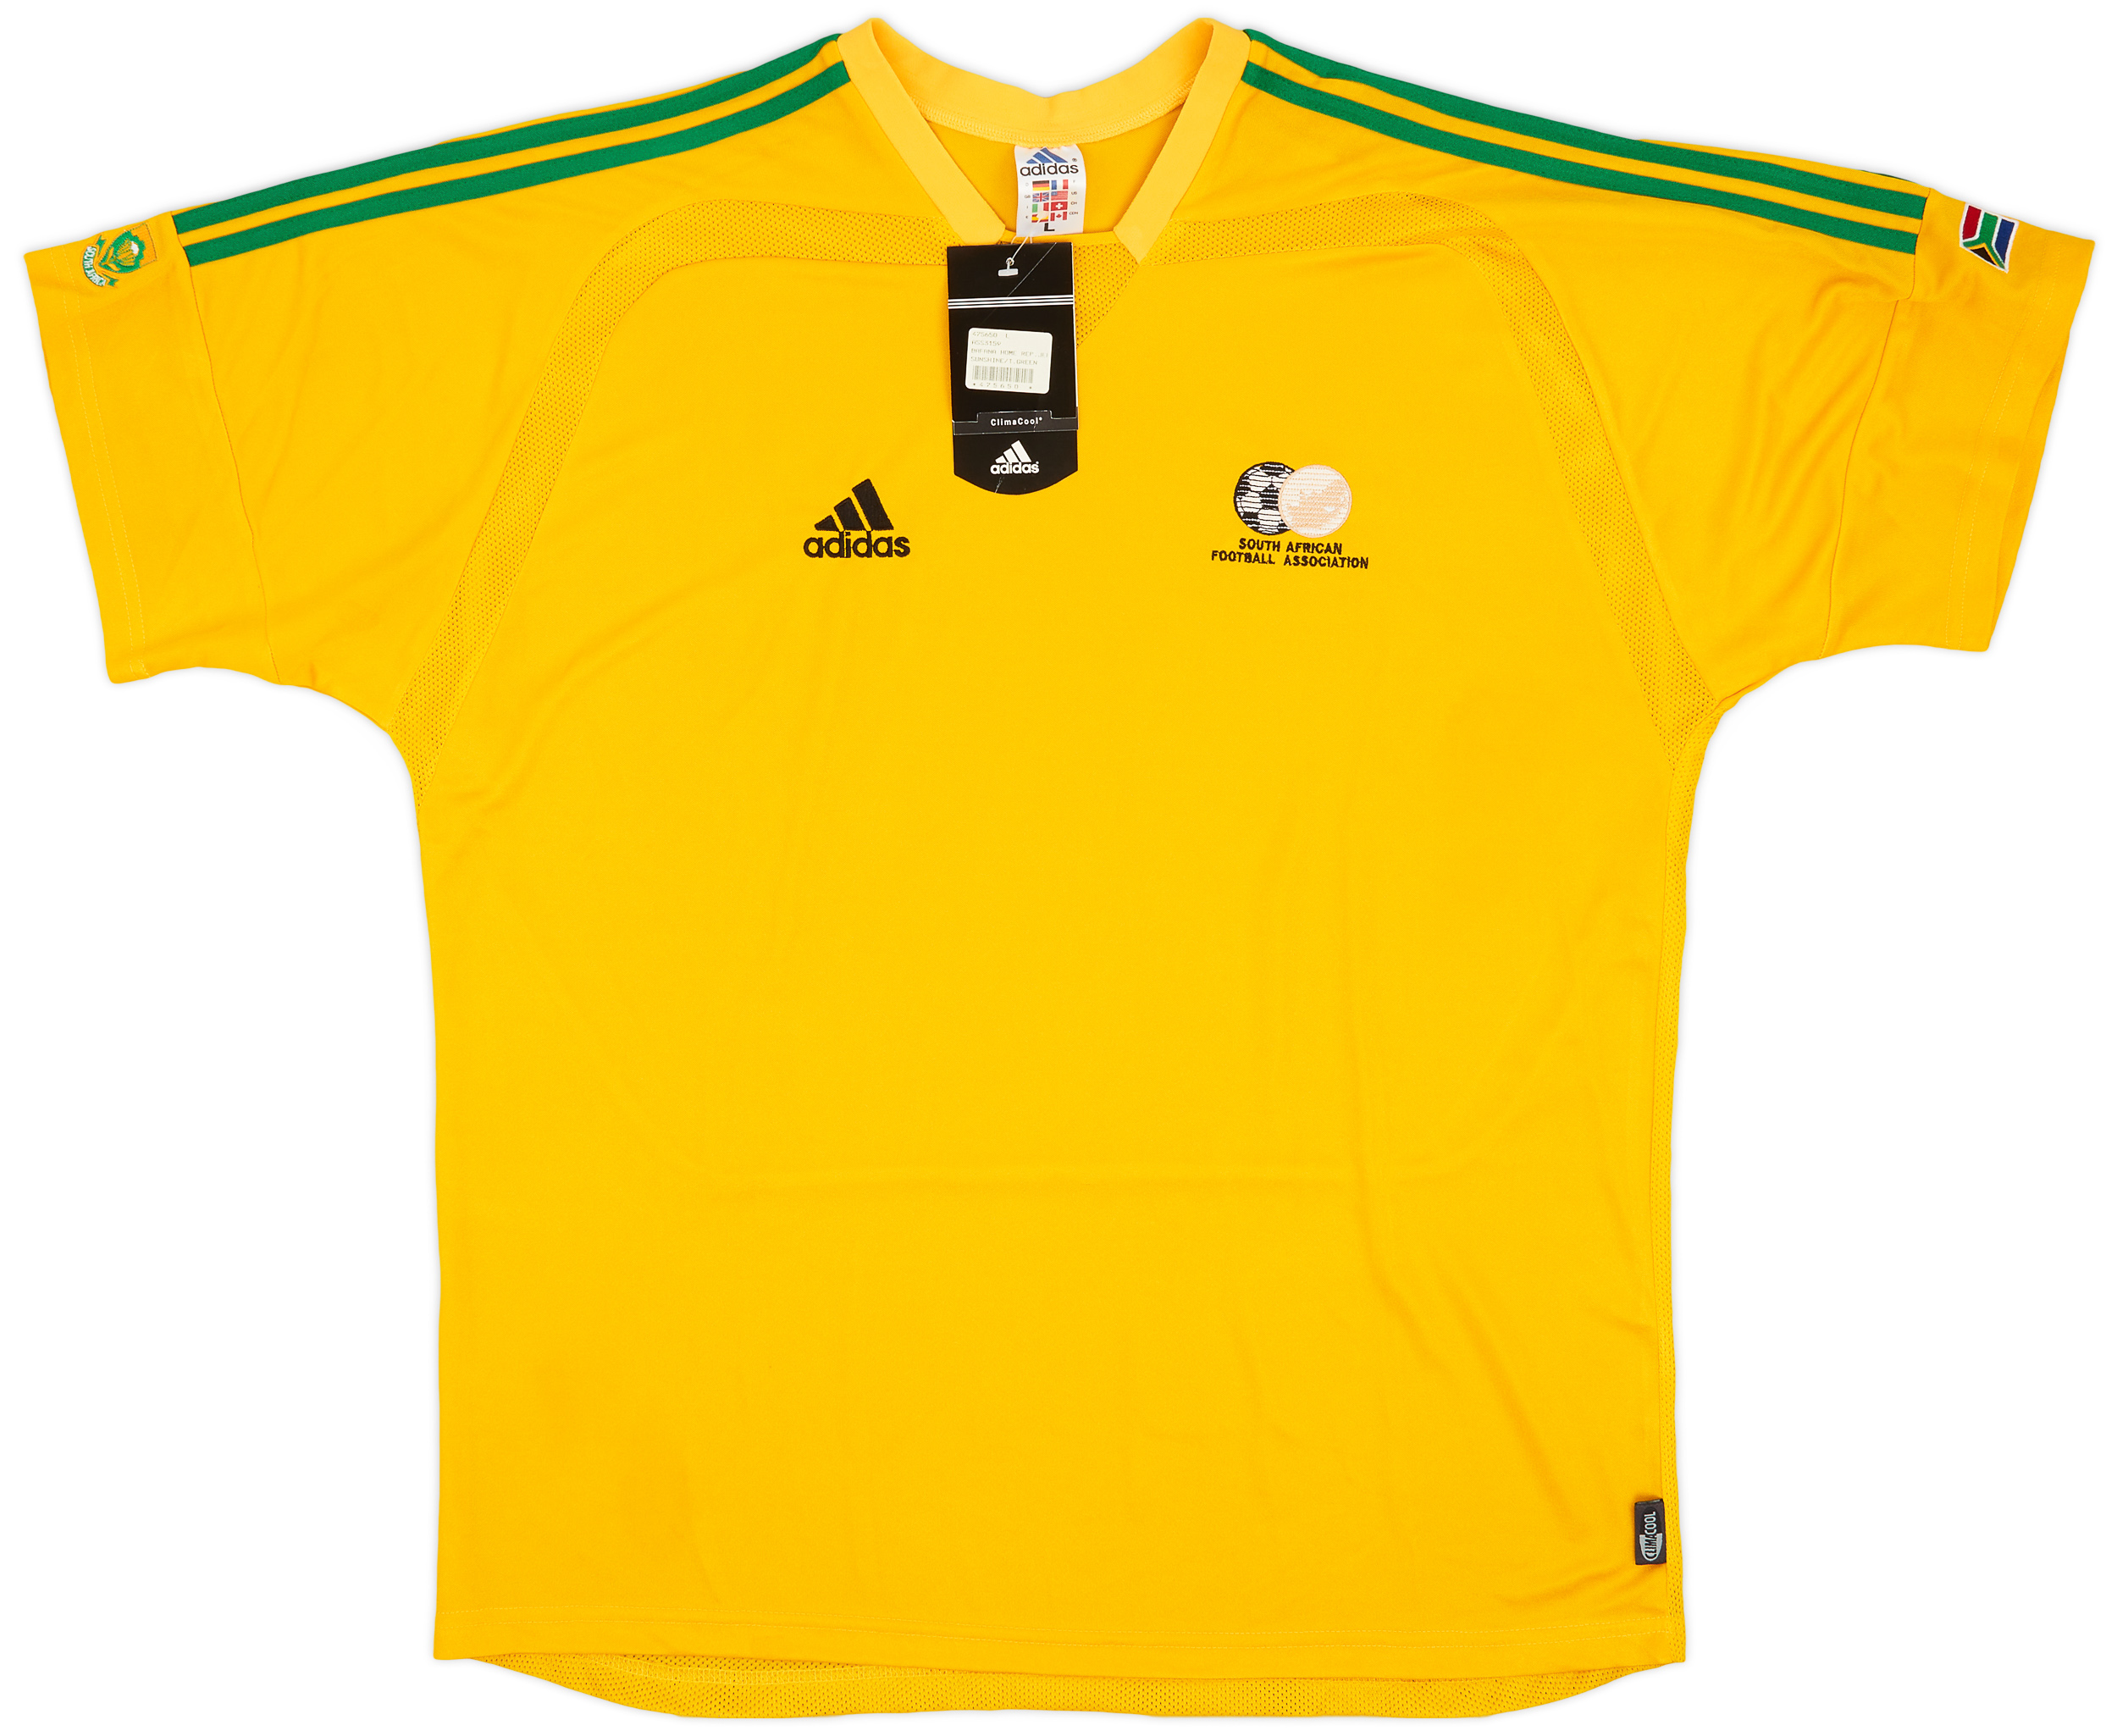 2004-06 South Africa Home Shirt ()